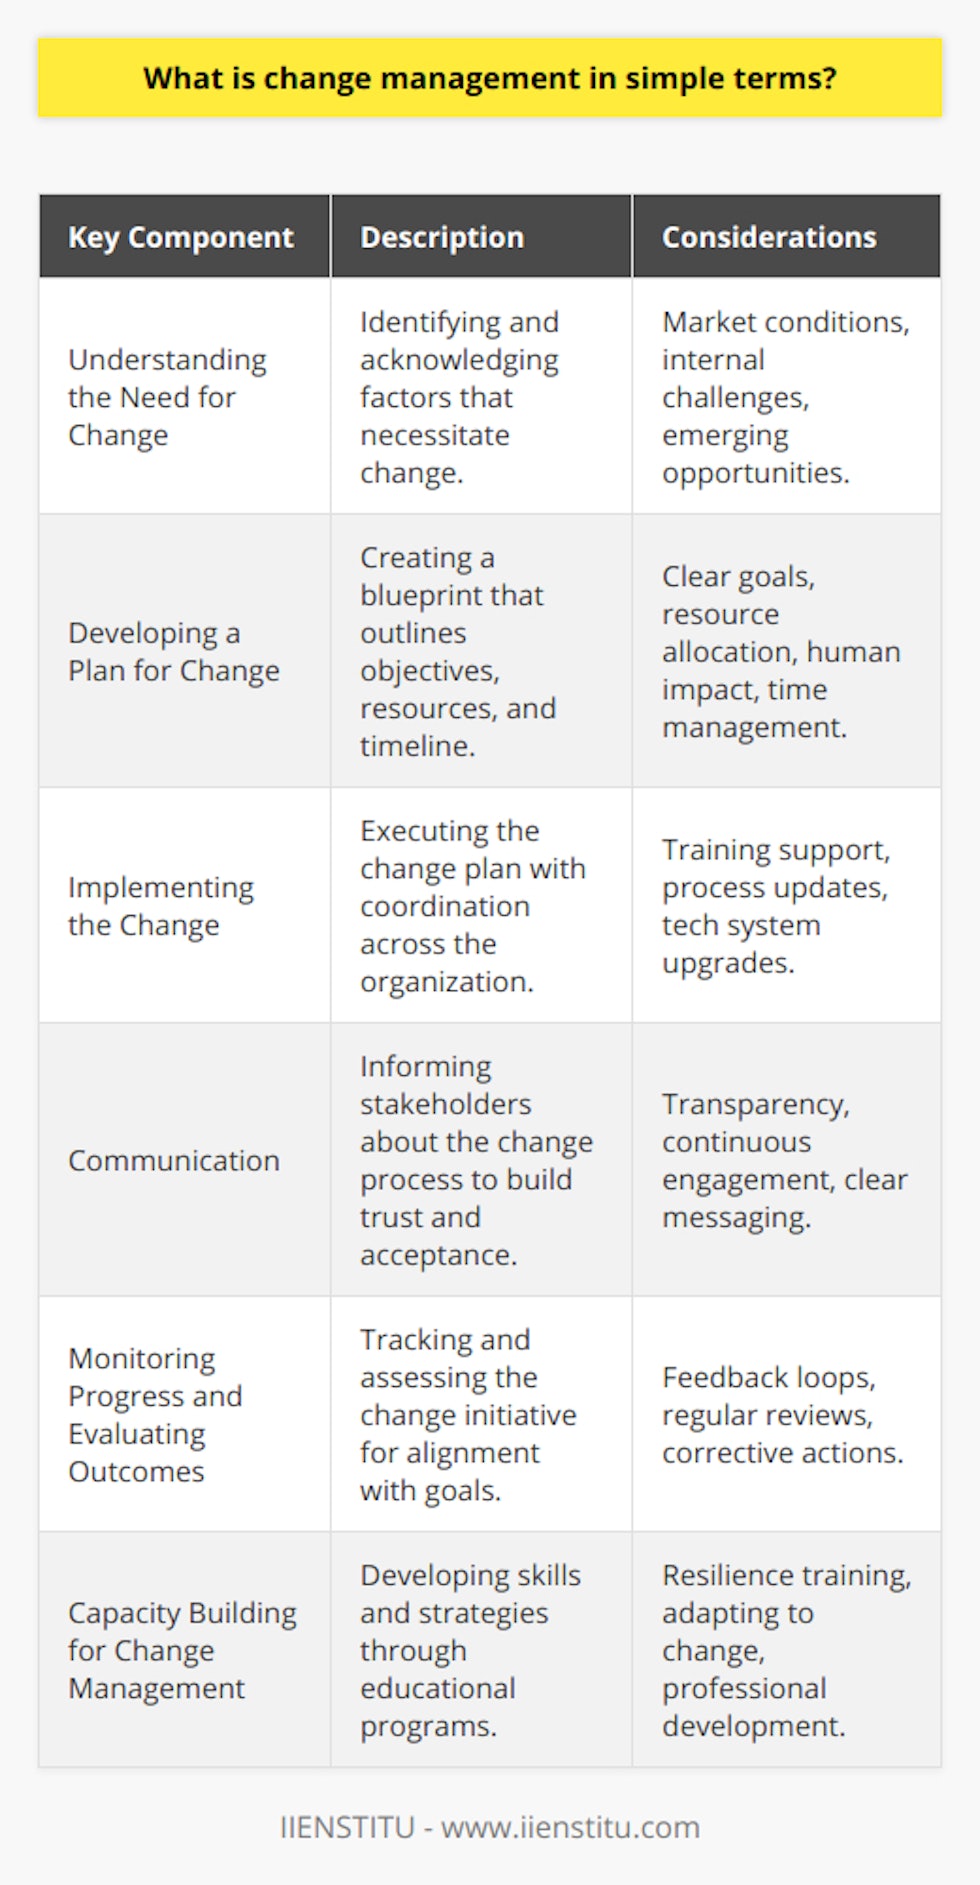 Change management is the structured approach to shifting individuals, teams, and organizations from a current state to a desired future state. It is an organizational process aimed at helping stakeholders accept and embrace changes in their business environment.At the core of change management is the principle that human beings are naturally resistant to change, and therefore a systematic approach is essential for overcoming this resistance and achieving the desired transformation effectively.**Key Components of Change Management**Understanding the Need for Change: Identifying the need for change is the cornerstone of change management. Organizations must recognize changing market conditions, internal challenges, or emerging opportunities that necessitate a change. This requires comprehensive assessment tools and strategic thinking to pinpoint exactly what needs to evolve. Developing a Plan for Change: After acknowledging the need for change, planning becomes the blueprint that guides the effort. This involves setting clear, measurable objectives, identifying the resources required, and devising a timeline that aligns with the organization's goals. The change plan must also consider the human aspect, addressing how the changes will affect personnel and how to manage the human reaction to change.Implementing the Change: The careful execution of a change plan involves coordination across various levels of an organization. This can entail updating technology systems, altering business processes, or adjusting organizational structures. Importantly, all staff who are affected by the change should receive appropriate training and support to help them navigate new roles or workflows.**Communication: The Lifeblood of Change Management**Effective communication cannot be overstated in change management. Stakeholders must be aware of why change is necessary, what the expected outcomes are, and how they will be part of this transformation. Good communication fosters trust and breaks down the barriers of uncertainty that can often accompany change.**Monitoring Progress and Evaluating Outcomes**An adaptive change management process includes tracking the progress of change initiatives and evaluating whether outcomes align with the original objectives. This feedback loop is critical for recognizing achievements and identifying areas that need adjustment. Regular reviews and after-action reports contribute to an organization's understanding of the change process and improve capacity for future changes.**Capacity Building for Change Management**Building capacity for effective change management often involves educational programs or workshops that focus on the development of skills and strategies related to change initiatives. For instance, IIENSTITU offers programs aimed at providing individuals and organizations with the knowledge and tools necessary for successful change management. Such programs are designed to strengthen an organization's ability to manage change proactively and to build a workforce that is resilient to transformation.In summary, change management is about preparing, equipping, and supporting individuals to successfully adopt change in order to drive organizational success and outcomes. It's a discipline that gives organizations the power to stay competitive and nimble in a fast-paced world. By carefully planning, communicating, implementing, and reviewing change, an organization can smoothly transition into its envisioned future.